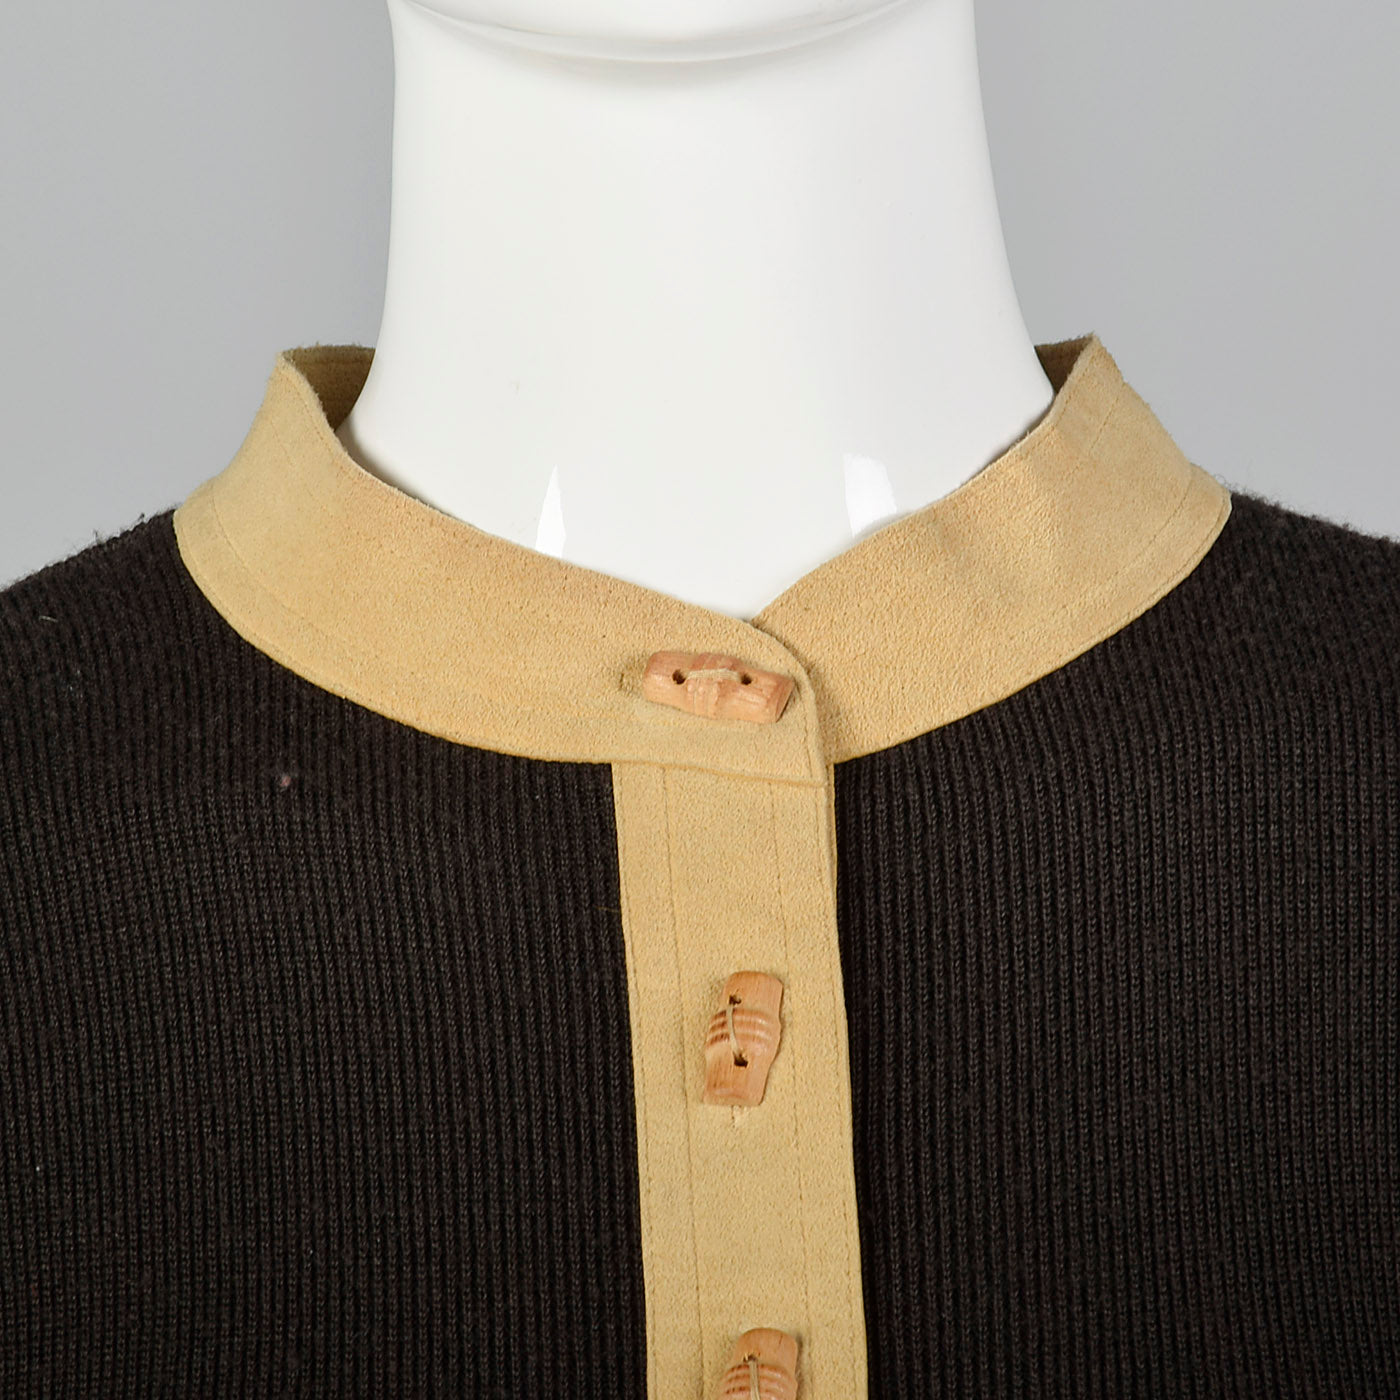 1970s Brown Knit and Leather Dress